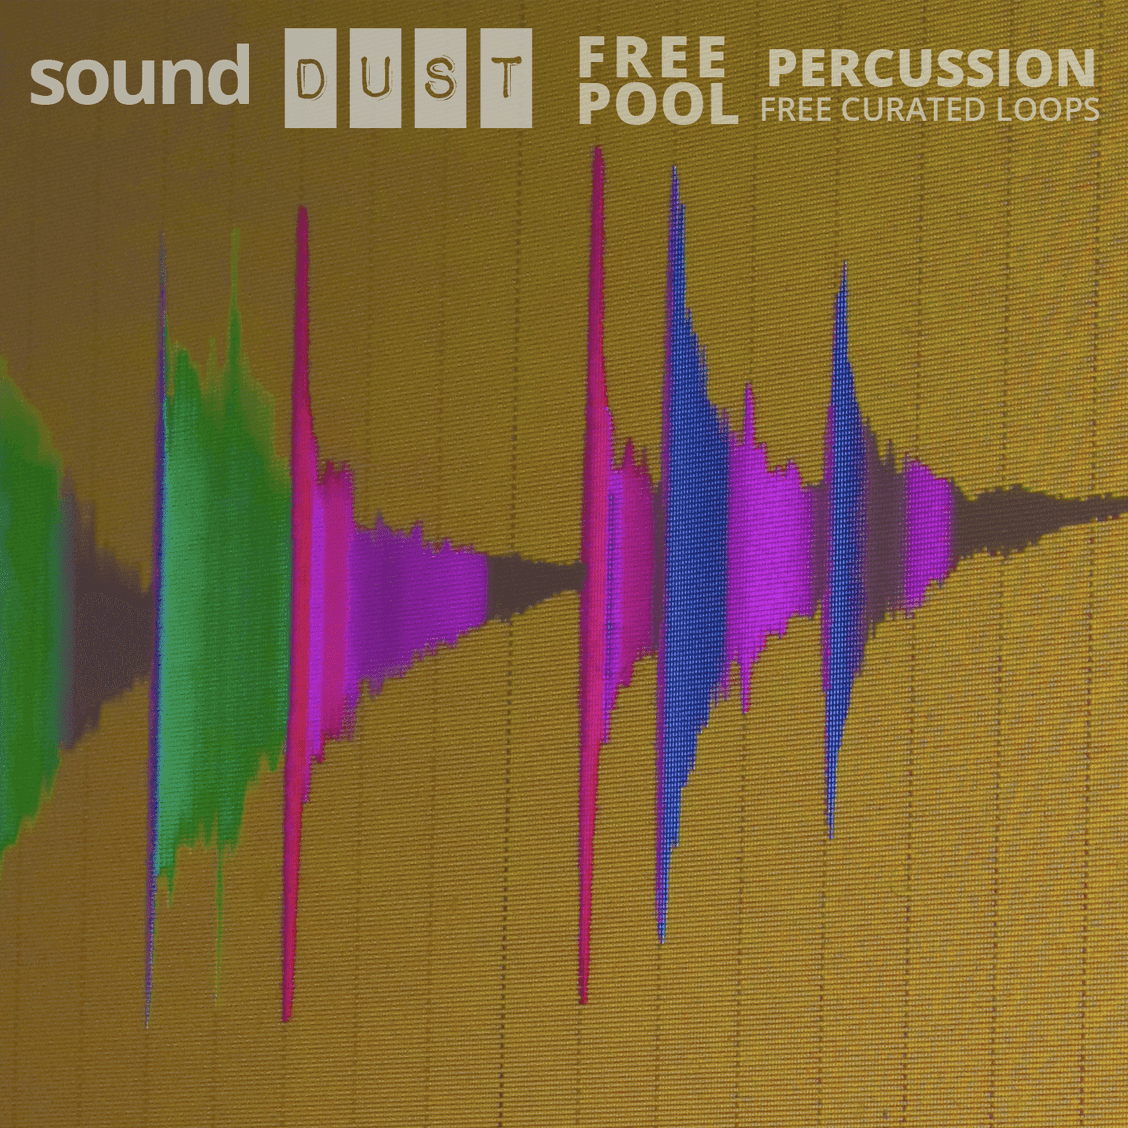 LOOP POOL PERCUSSION by Sound Dust